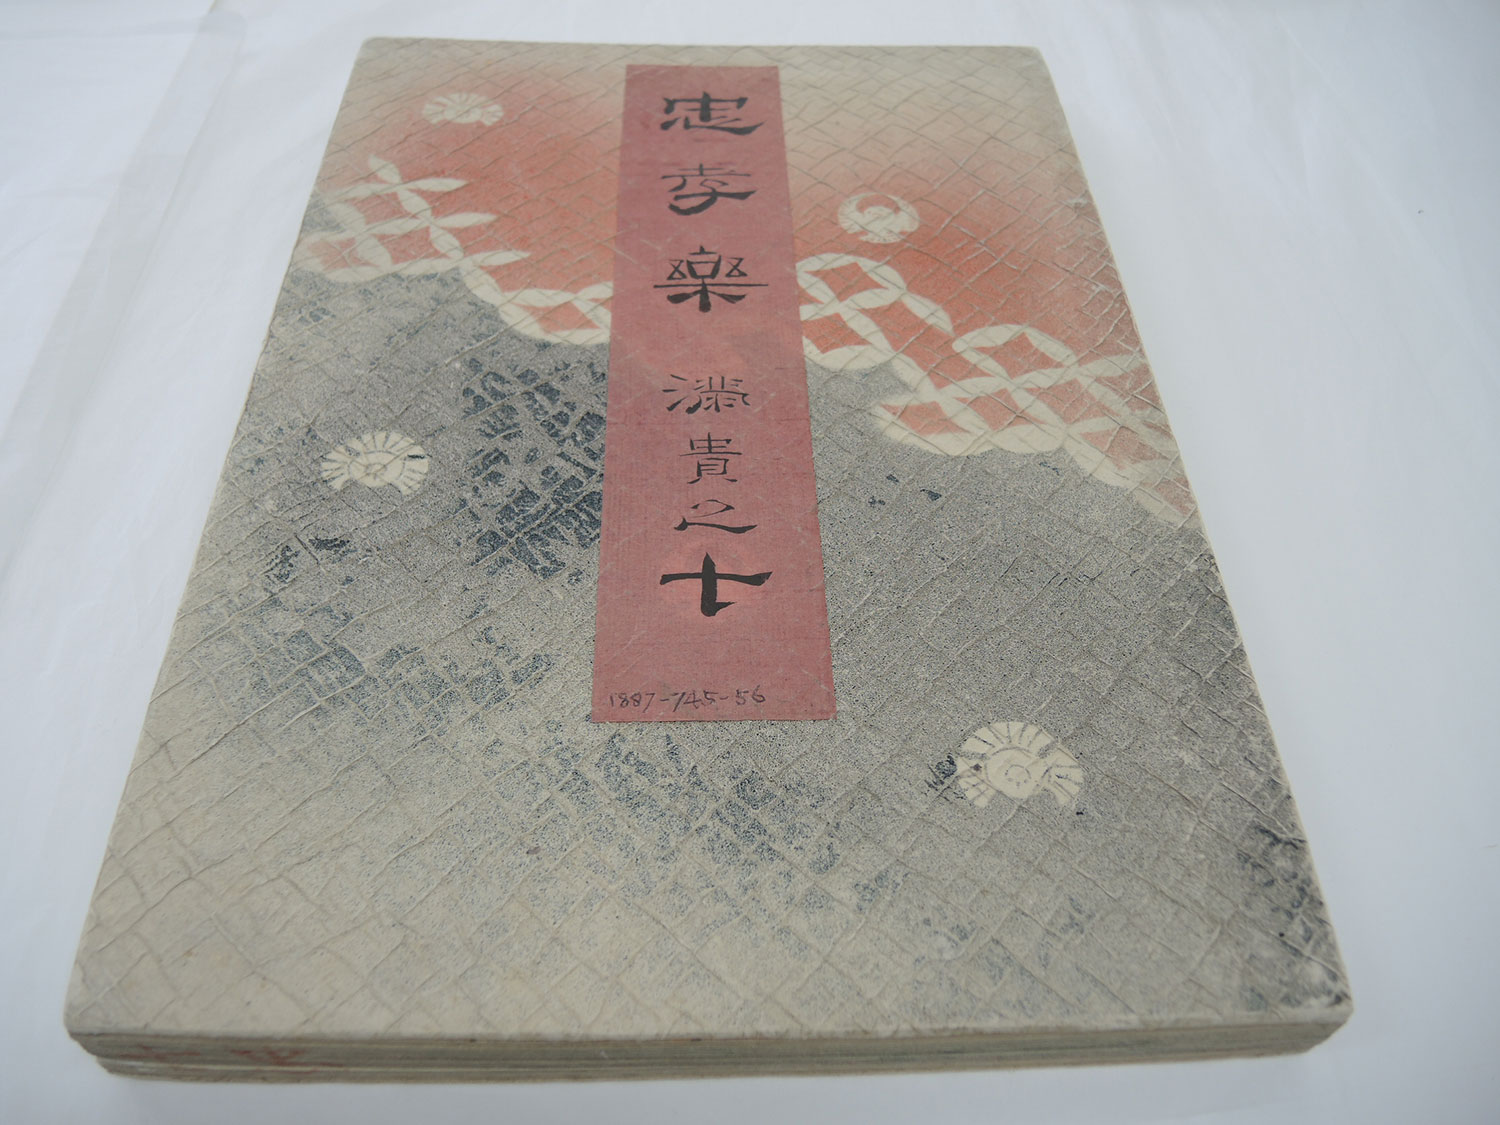 Album in which the print was housed.